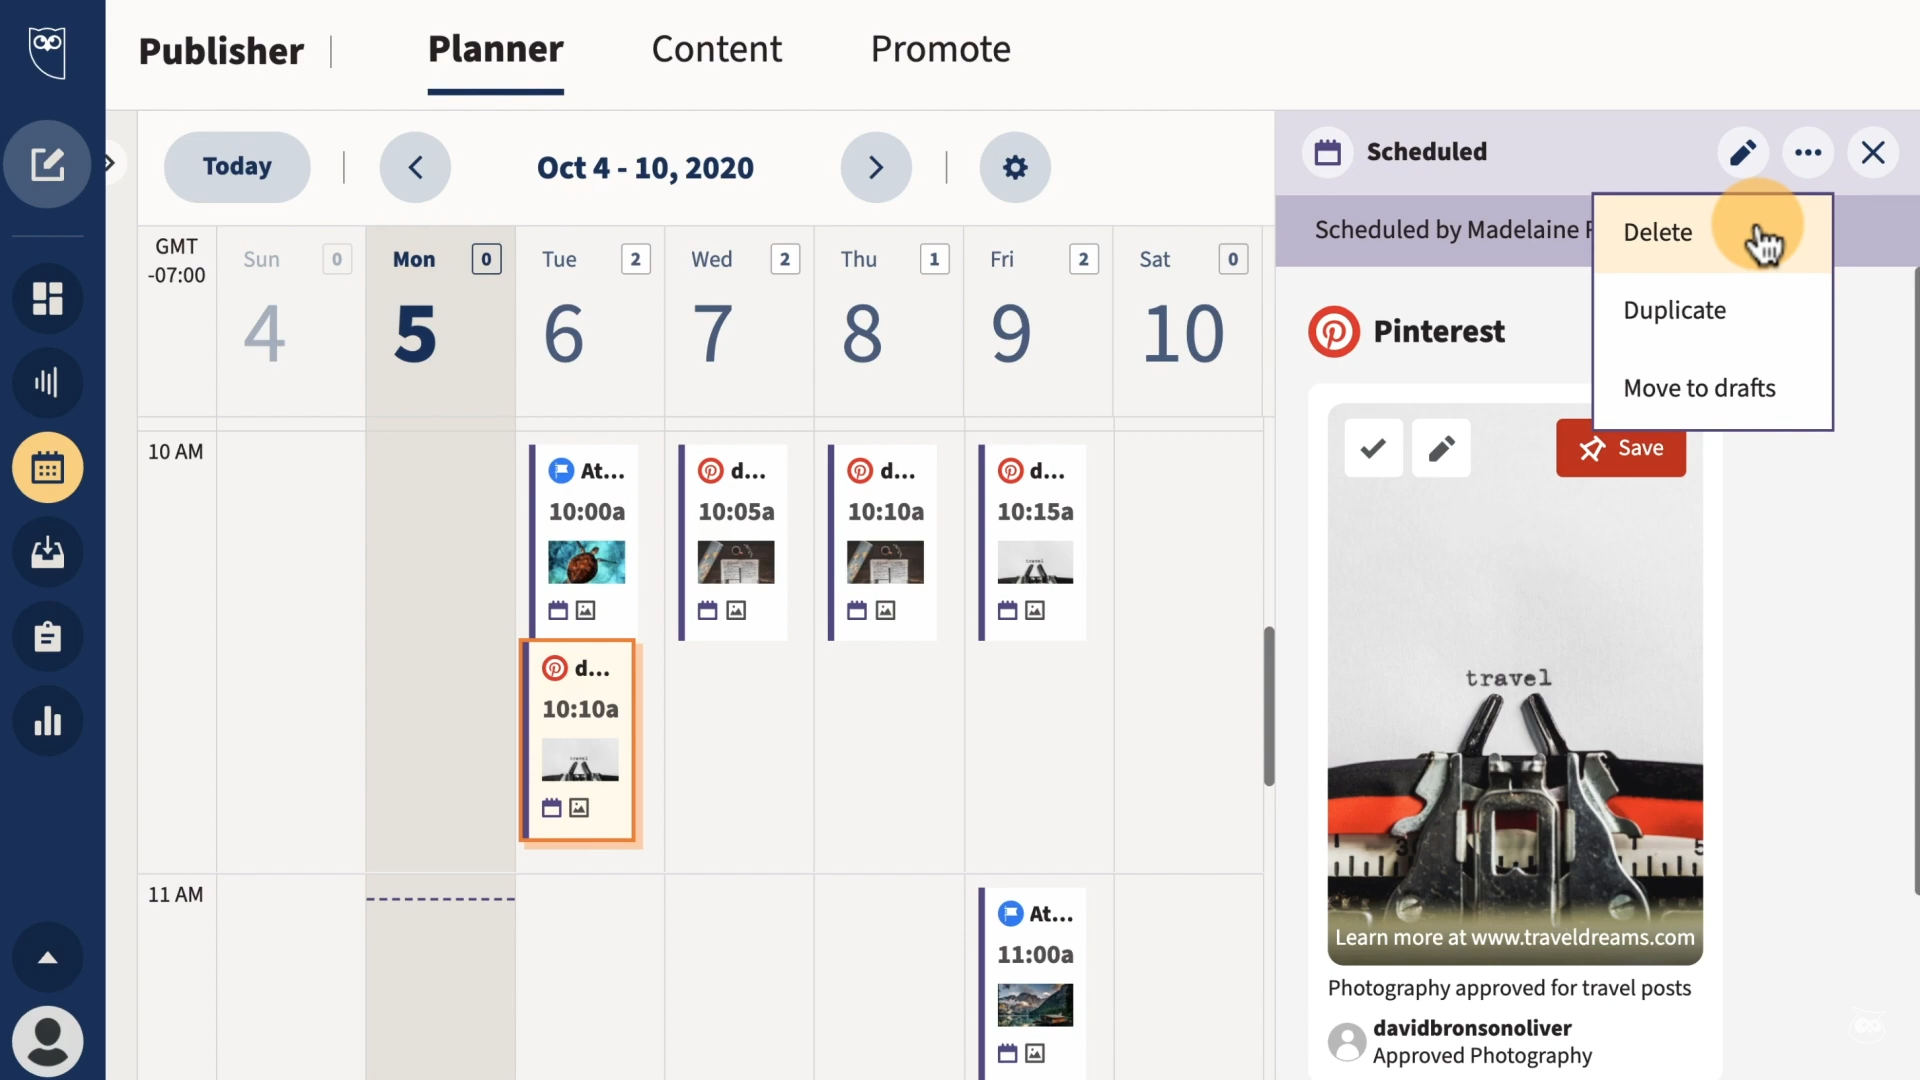 Hootsuite Pinterest dashboard presents a colorful social calendar to manage your Pinterest posts